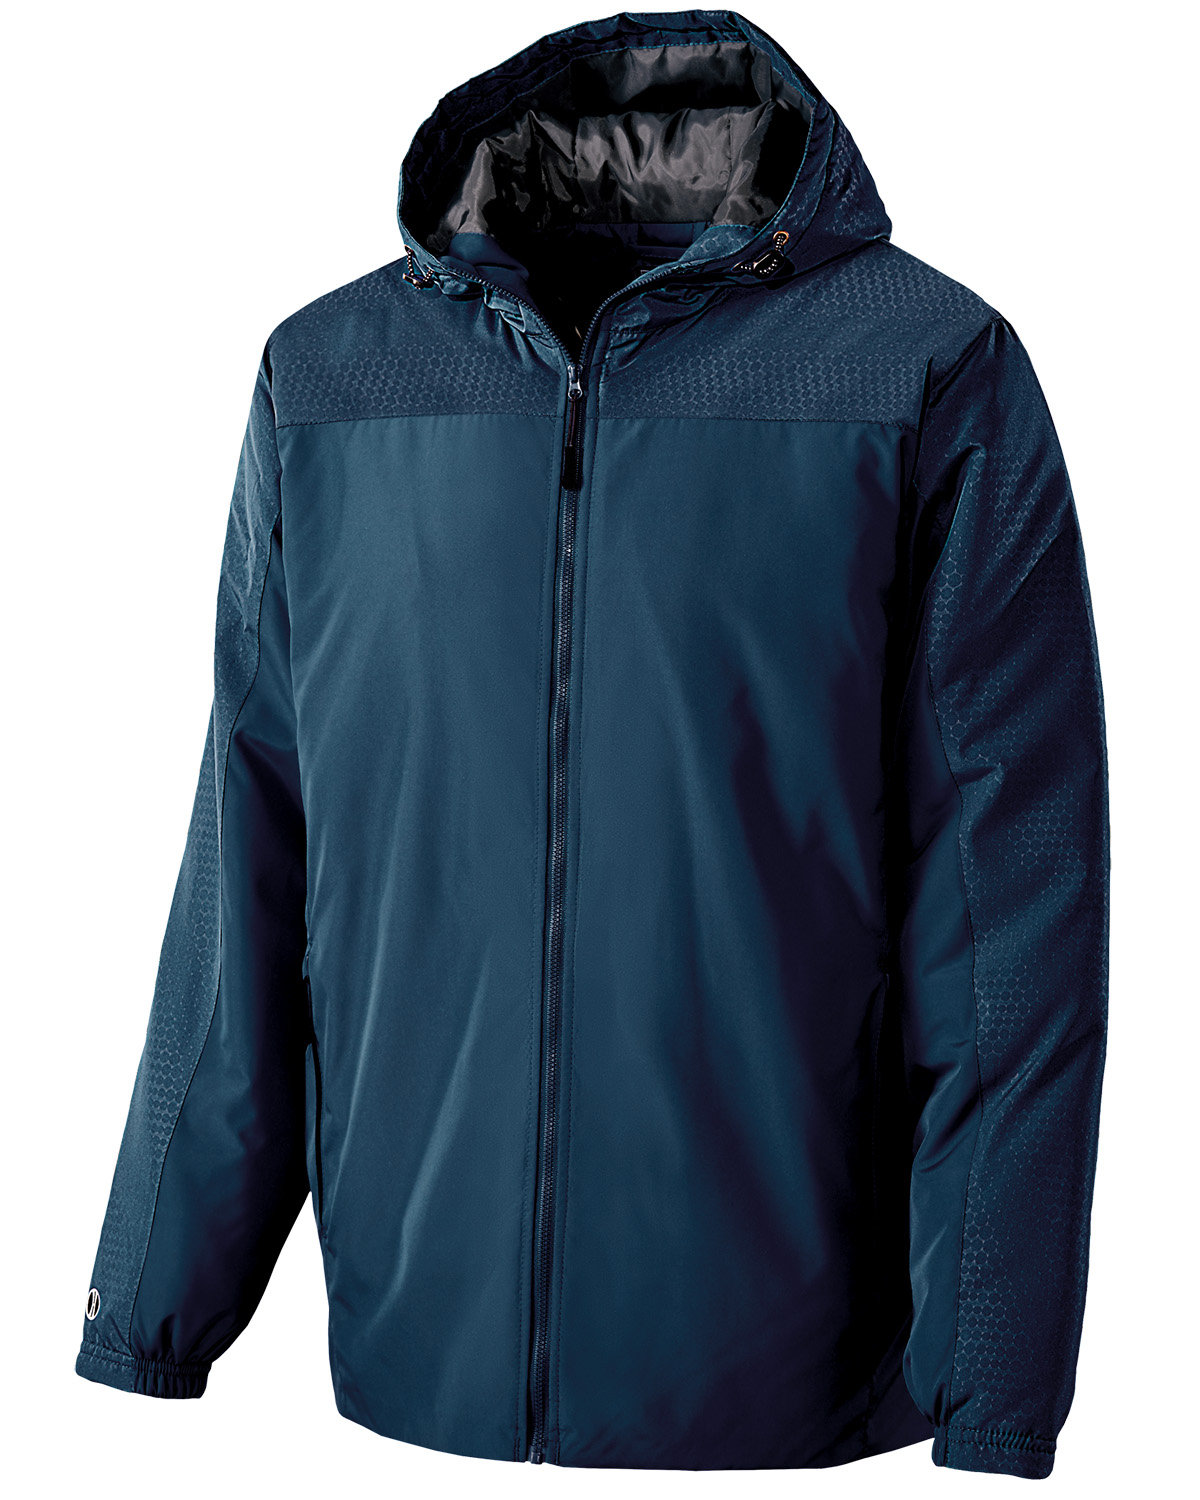 Adult Polyester Full Zip Bionic Hooded Jacket-